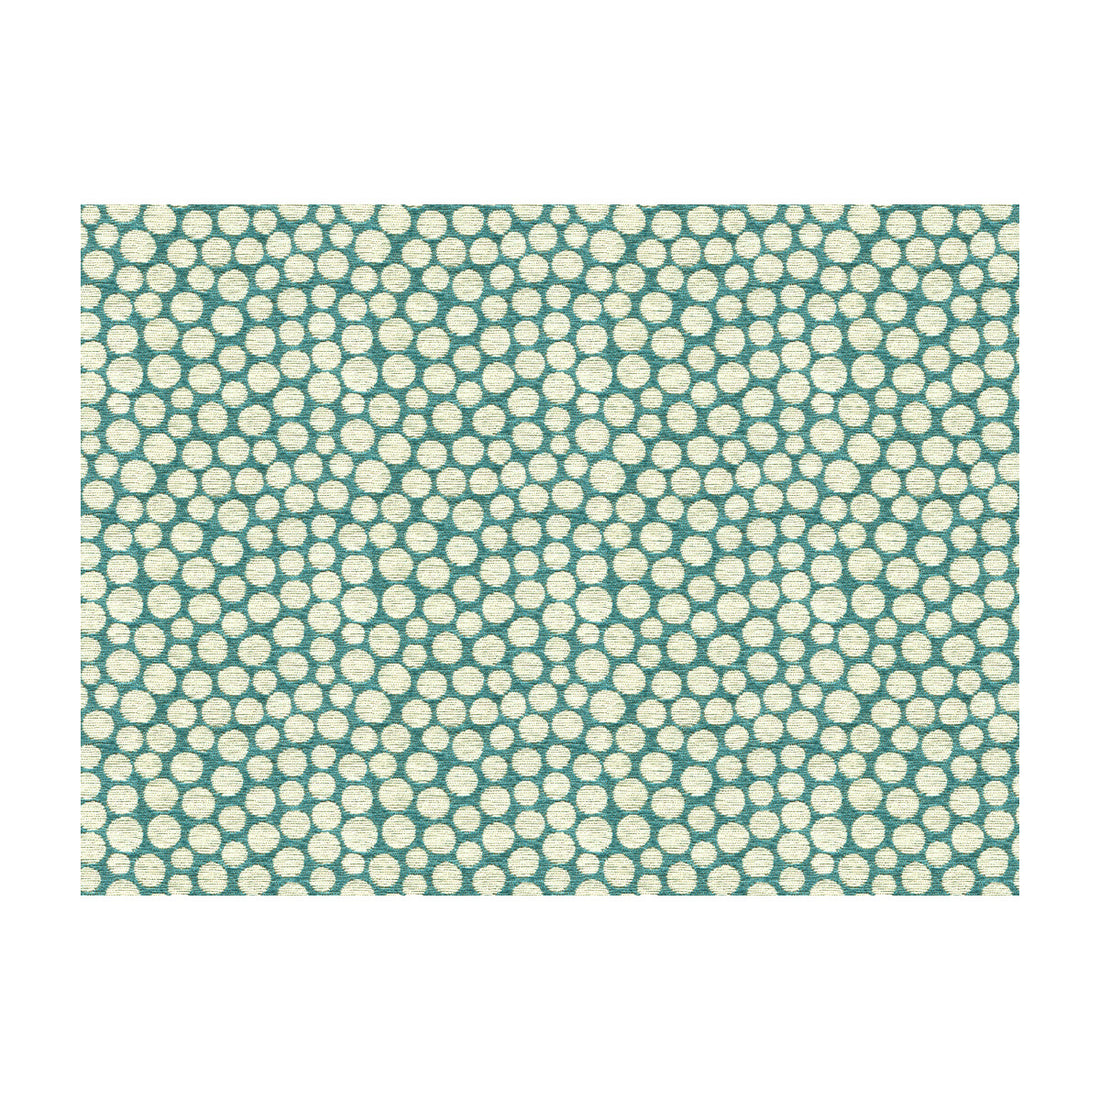 Cilia fabric in cyan color - pattern 33410.1635.0 - by Kravet Basics in the Jeffrey Alan Marks Waterside collection